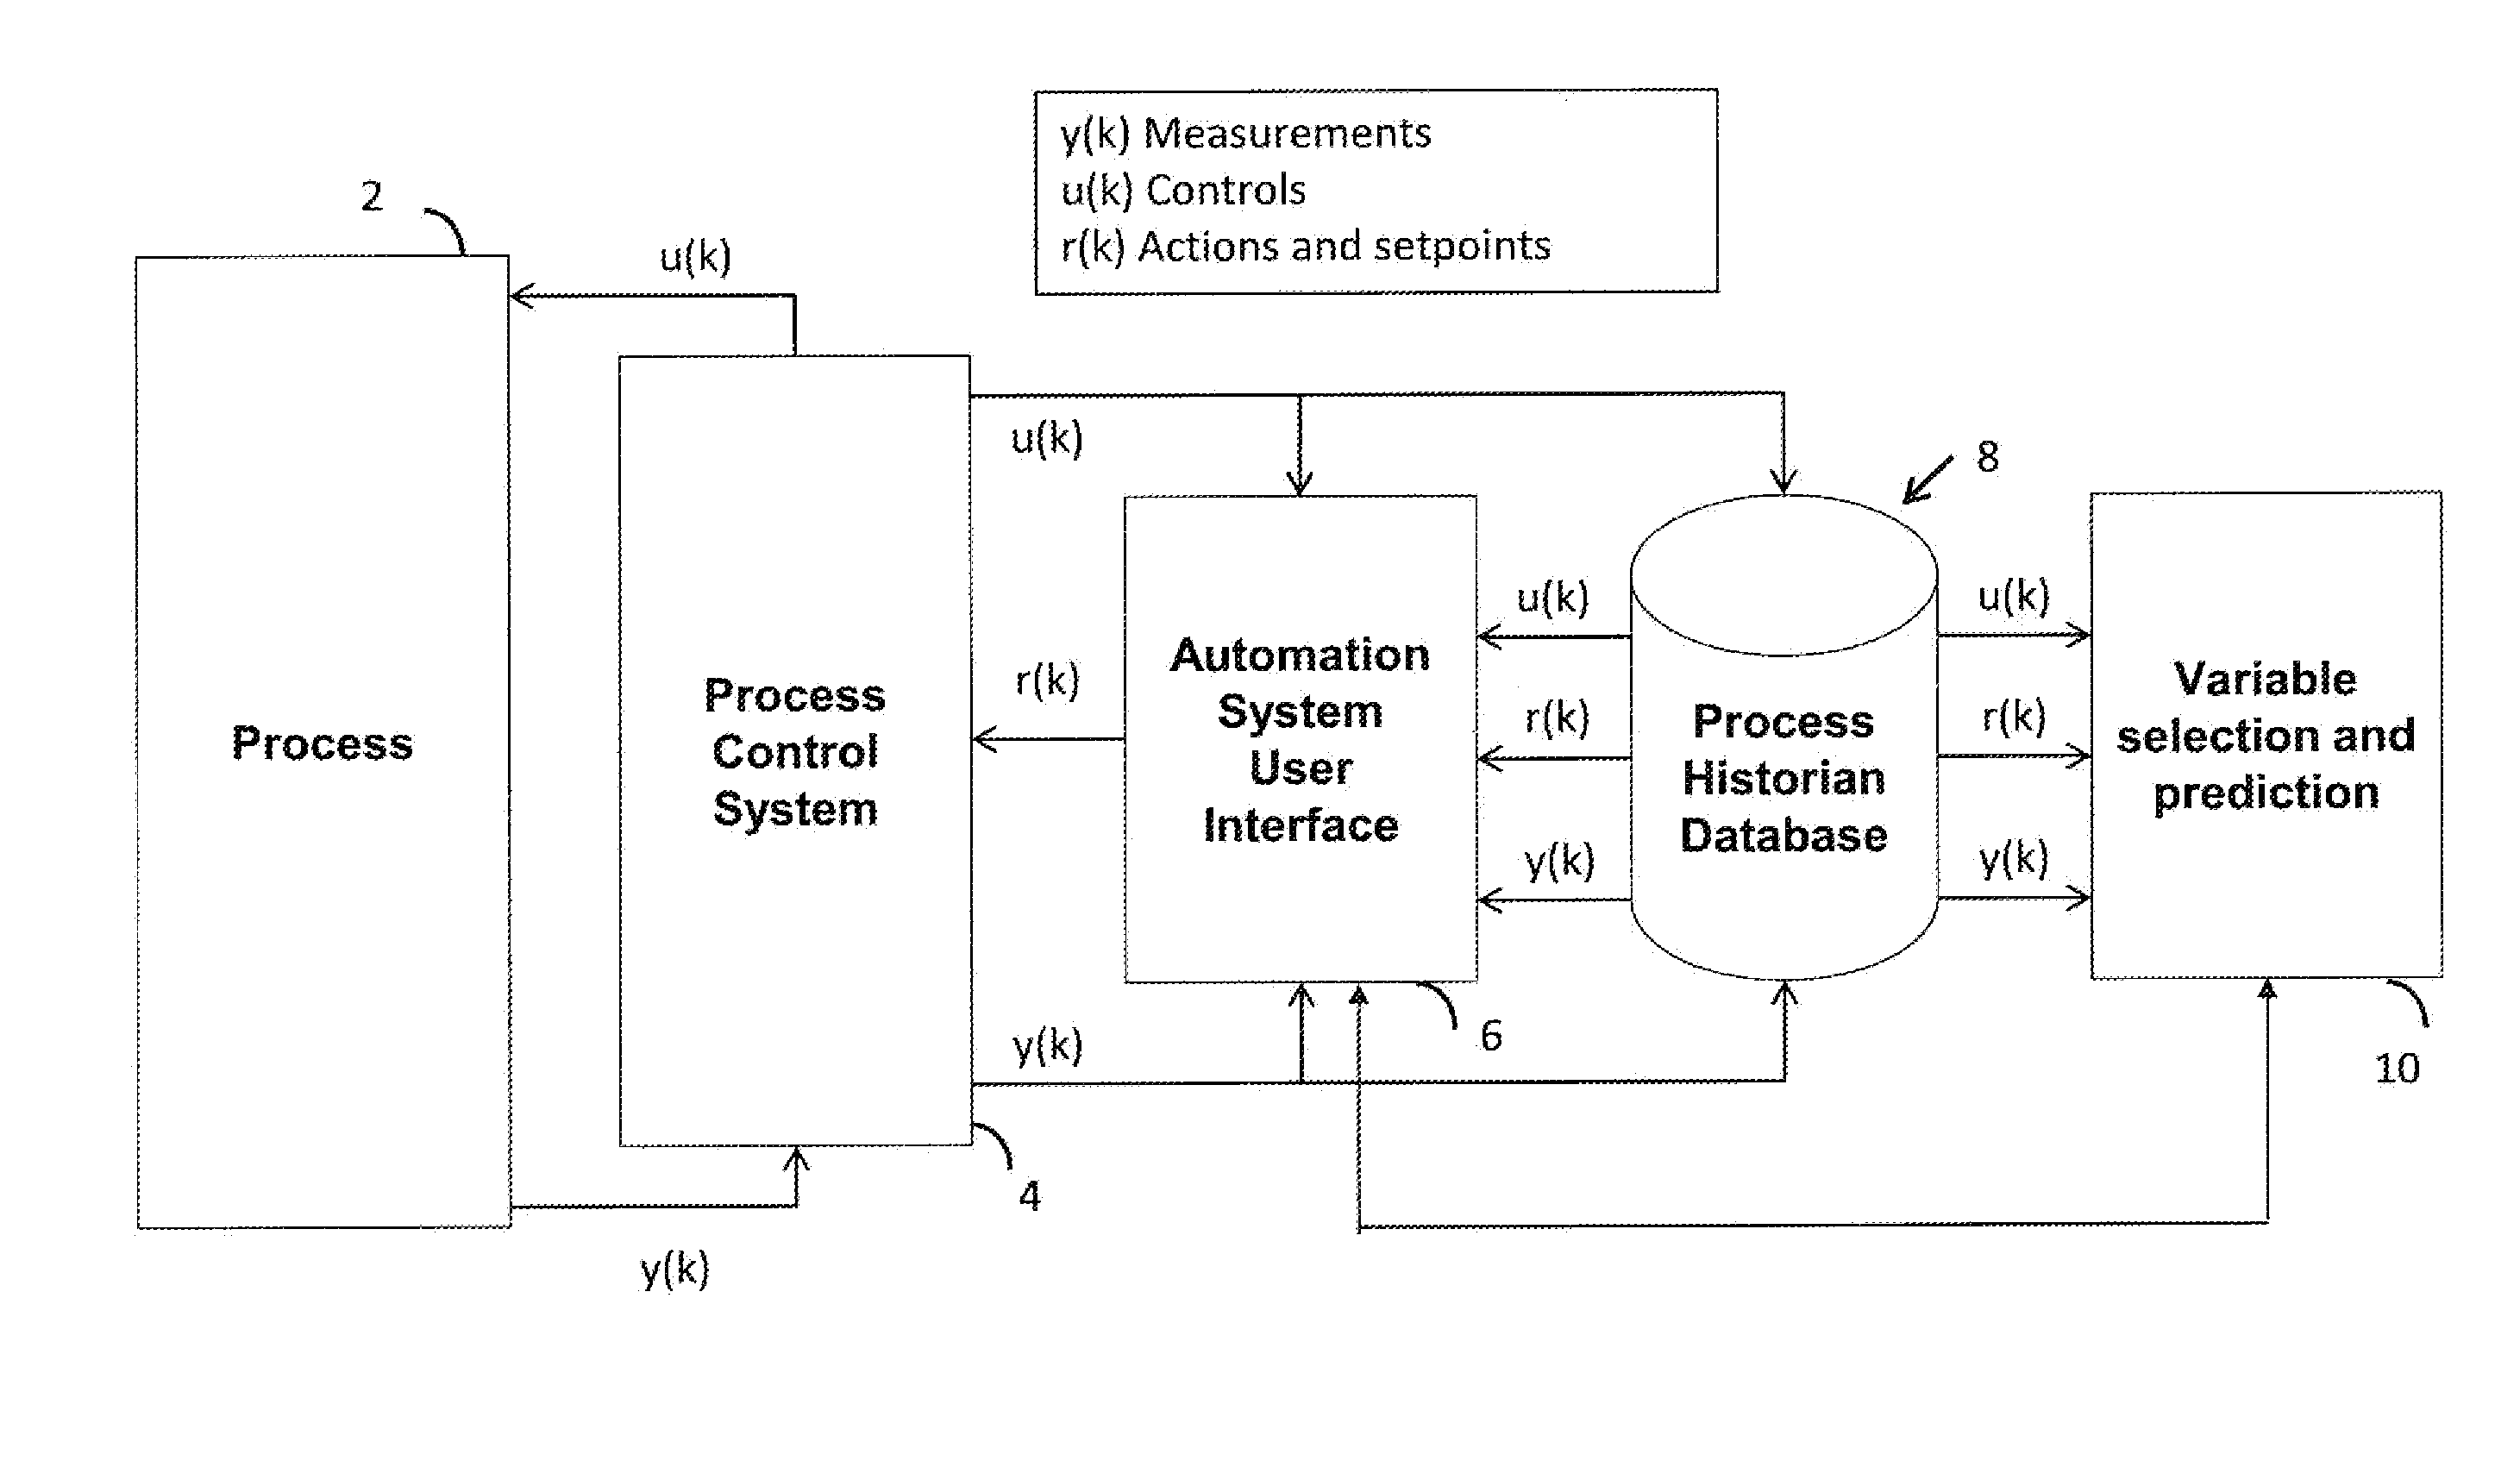 Method of operating a process or machine